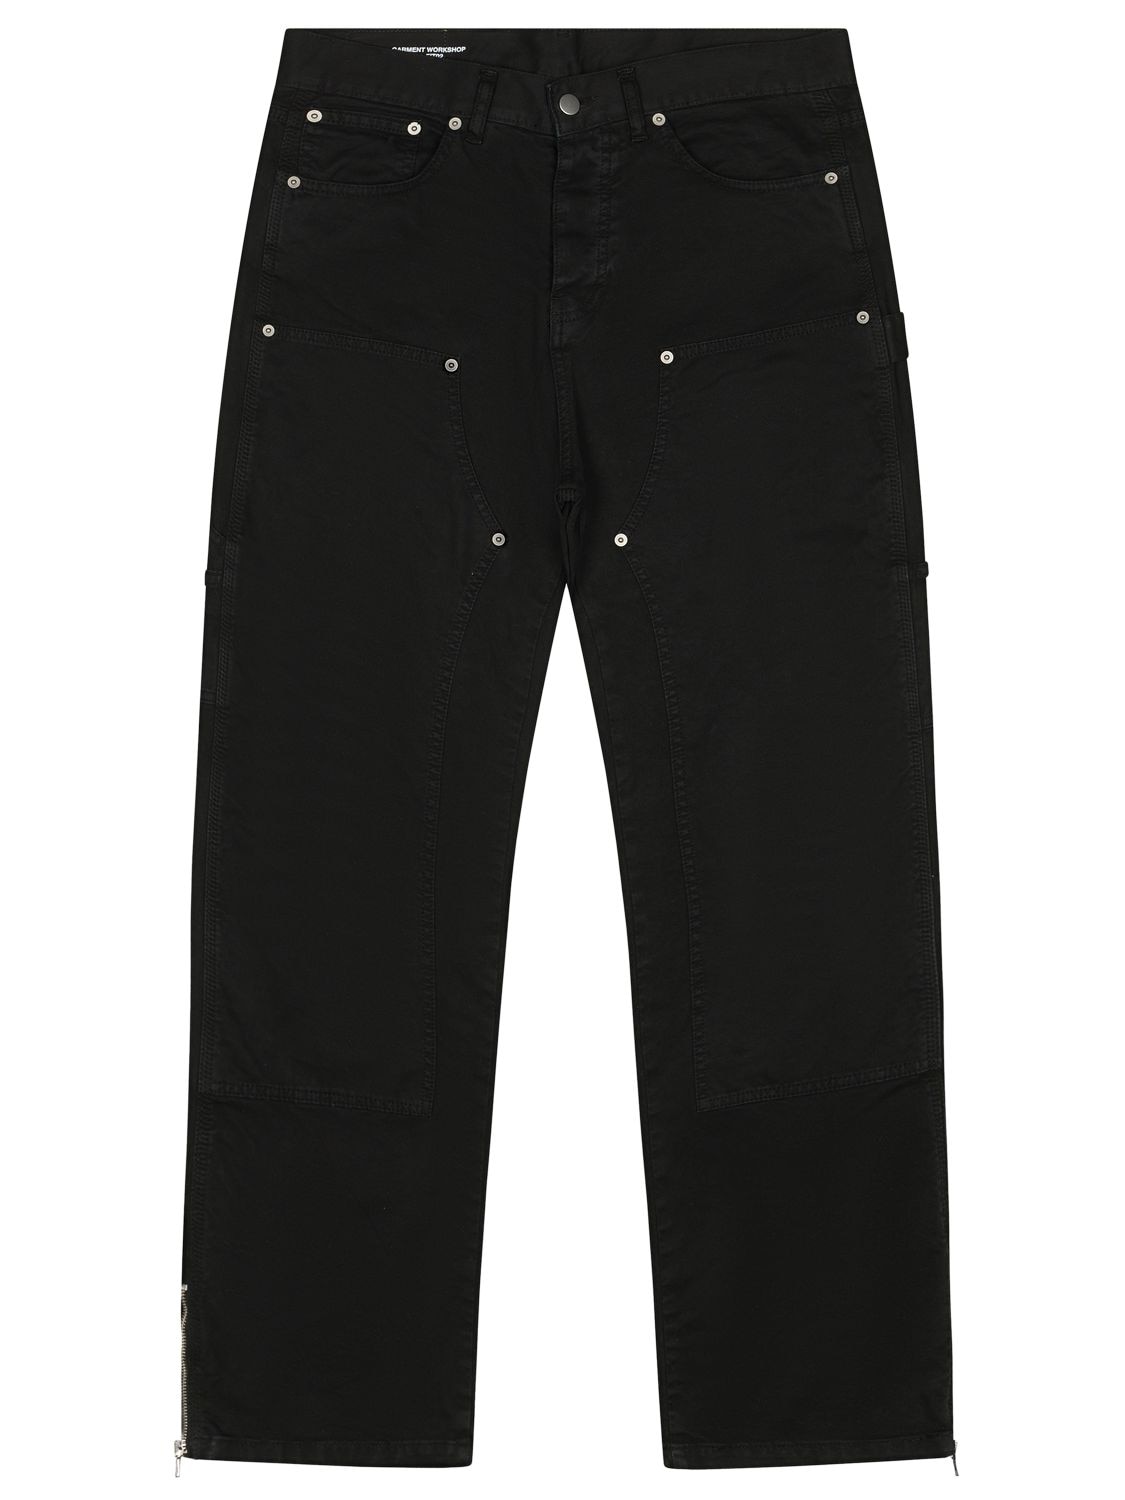 Image of Canvas Double Knee Pants